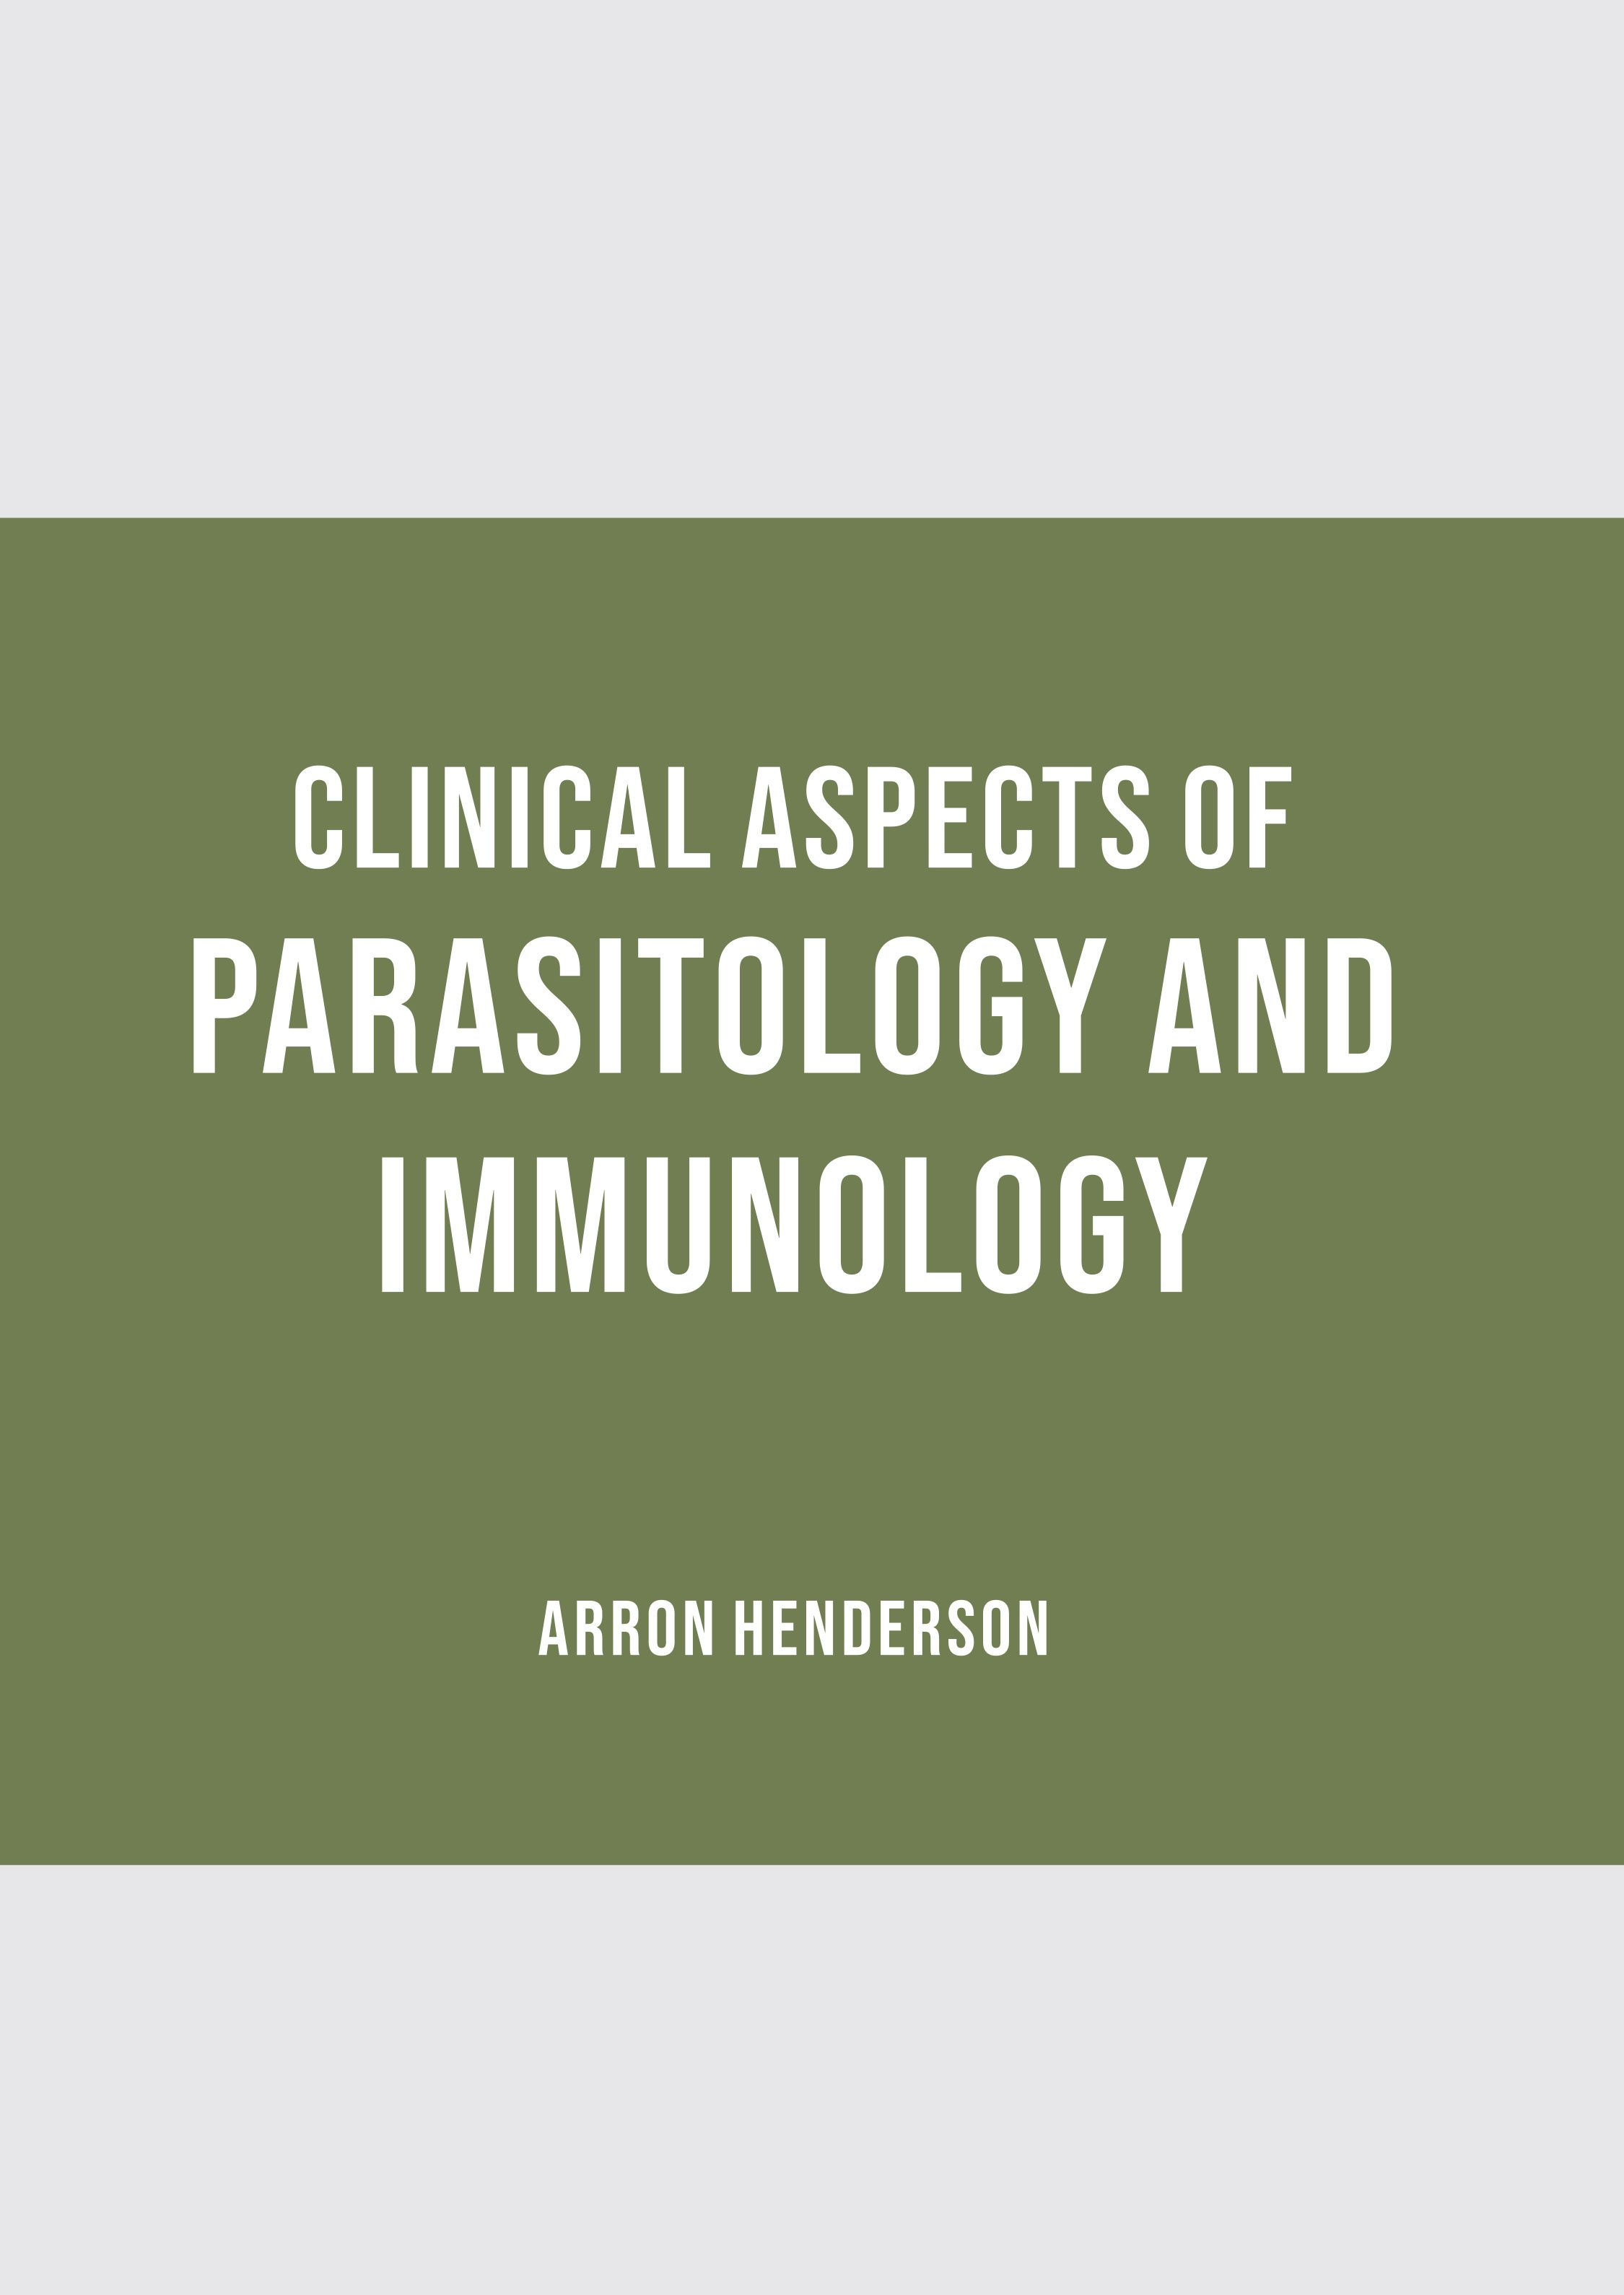 CLINICAL ASPECTS OF PARASITOLOGY AND IMMUNOLOGY